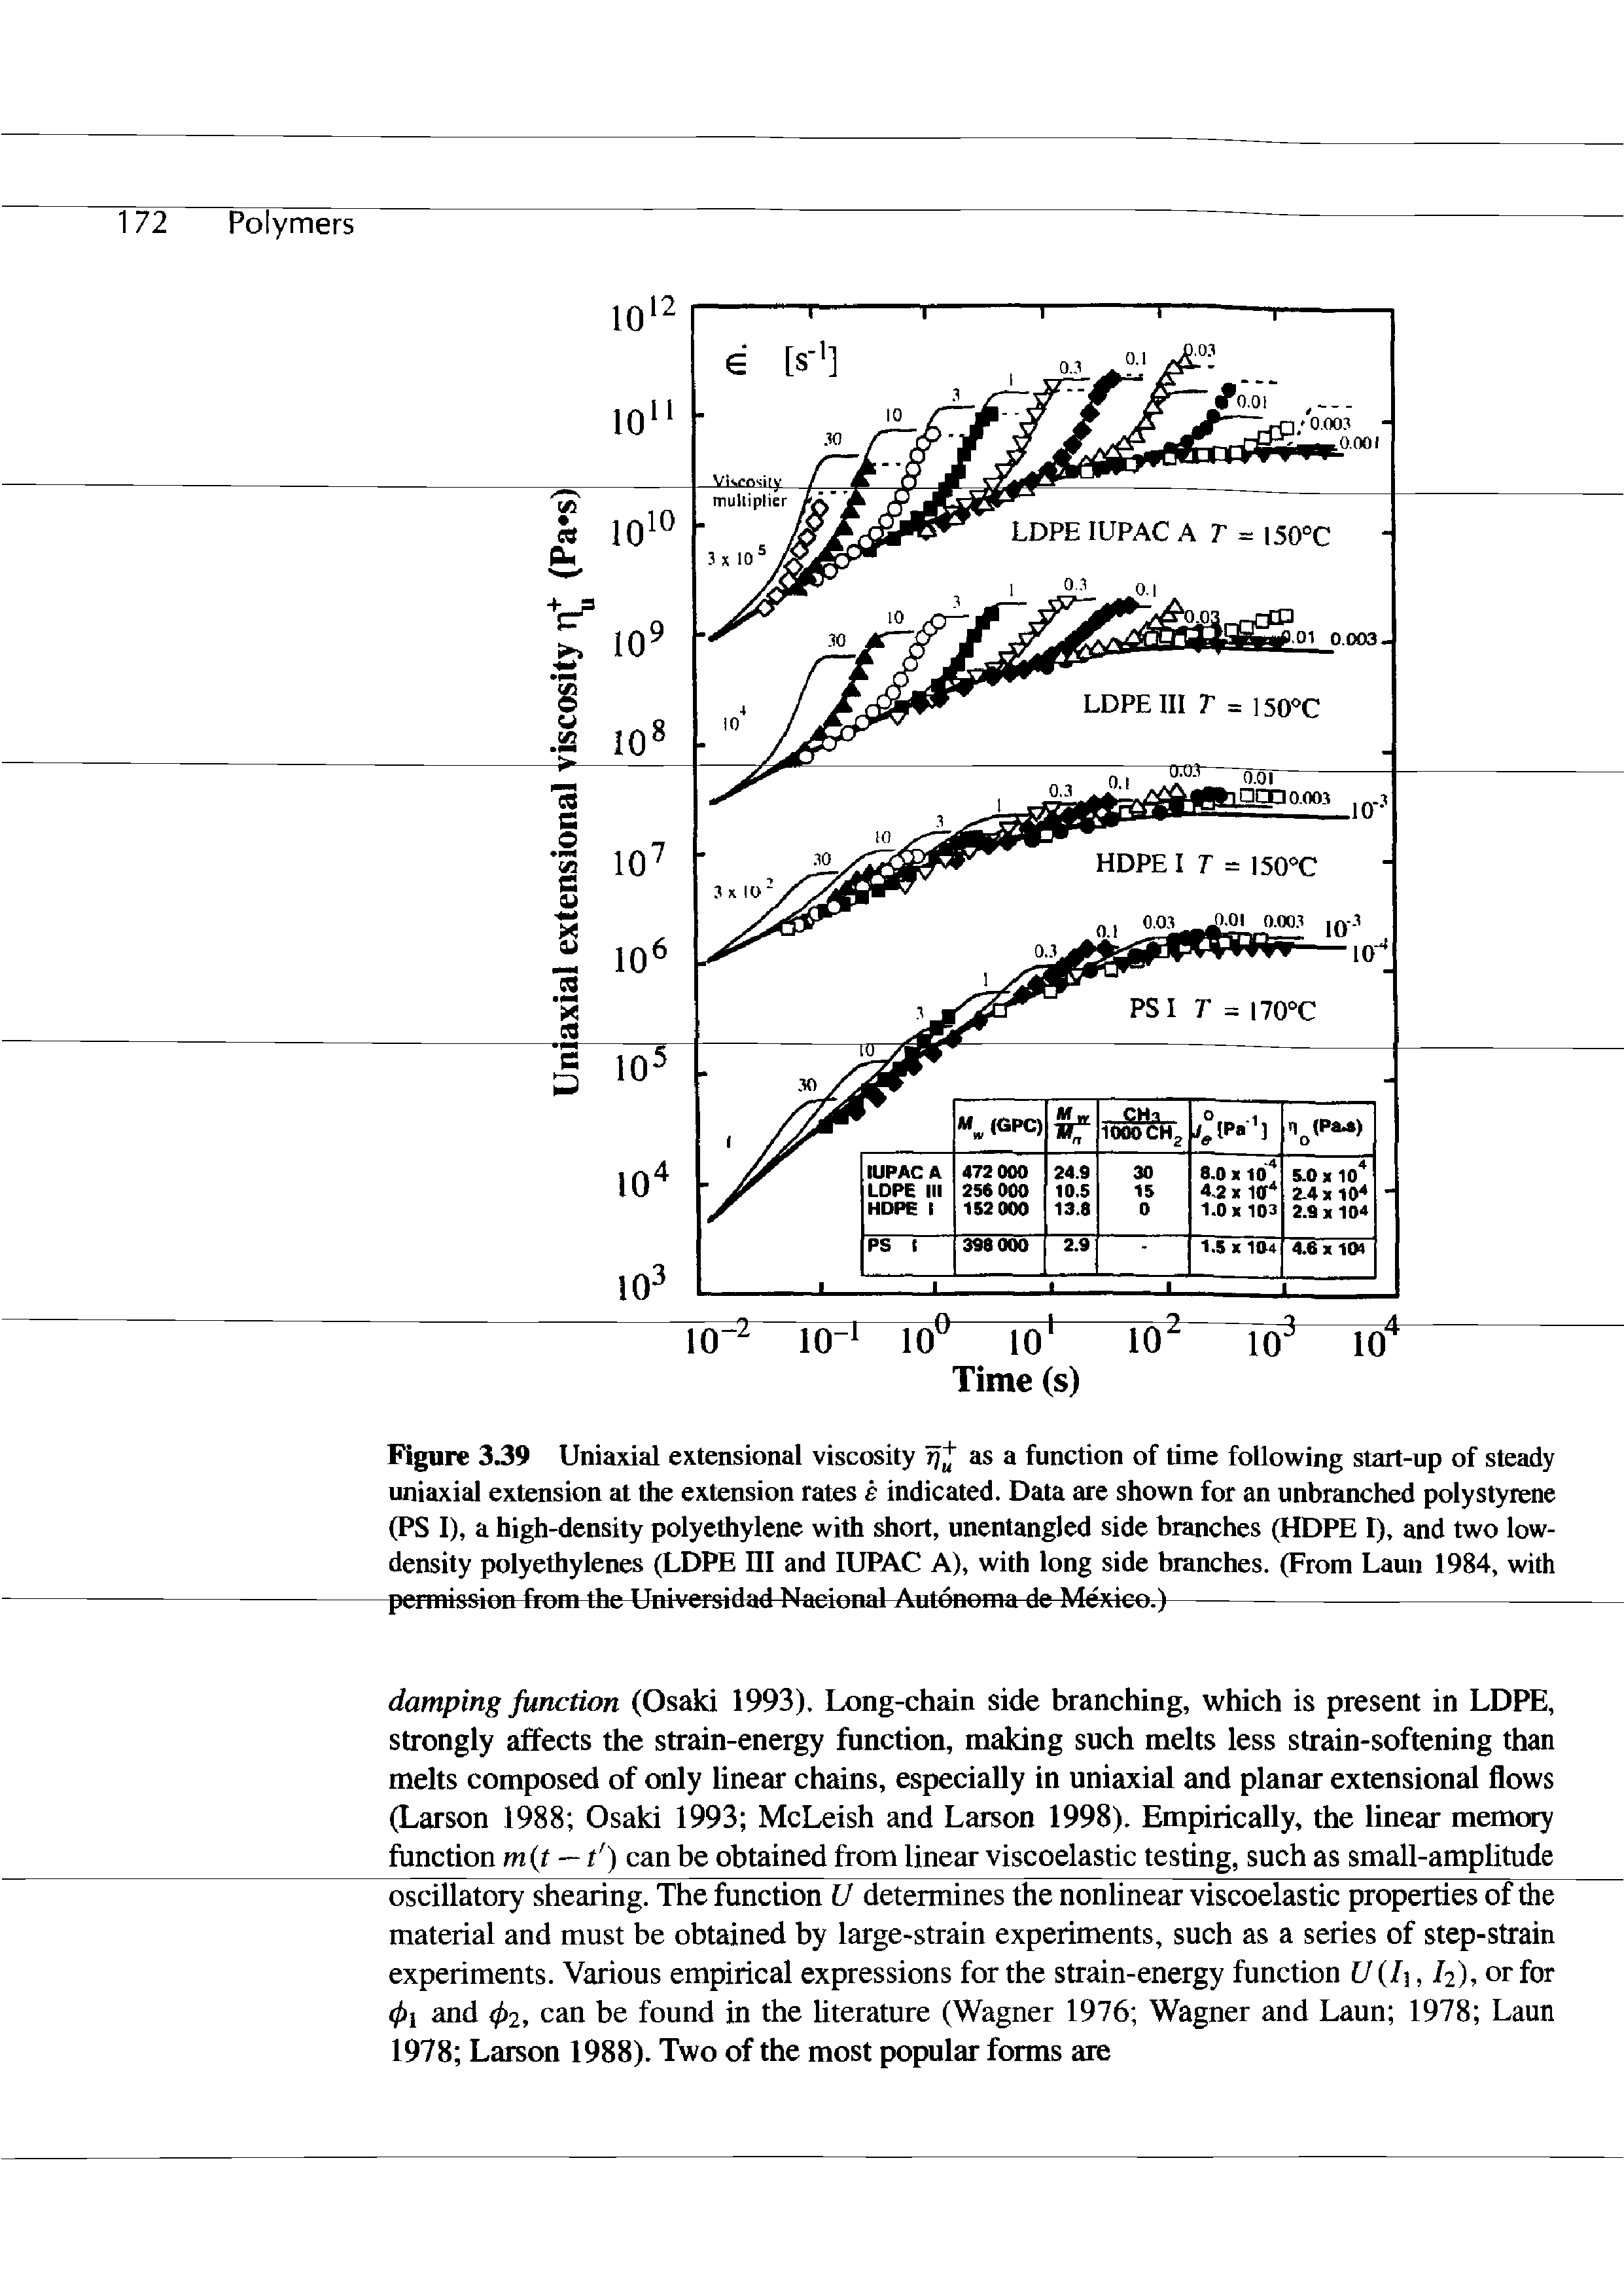 Figure 3.39 Uniaxial extensional viscosity rj as a function of time following start-up of steady uniaxial extension at the extension rates e indicated. Data are shown for an unbranched polystyrene (PS I), a high-density polyethylene with short, unentangled side branches (HOPE I), and two low-density polyethylenes (LDPE III and lUPAC A), with long side branches. (From Laun 1984, with permission from the Universidad Nacional Autonoma de Mexico.)------------------------------...